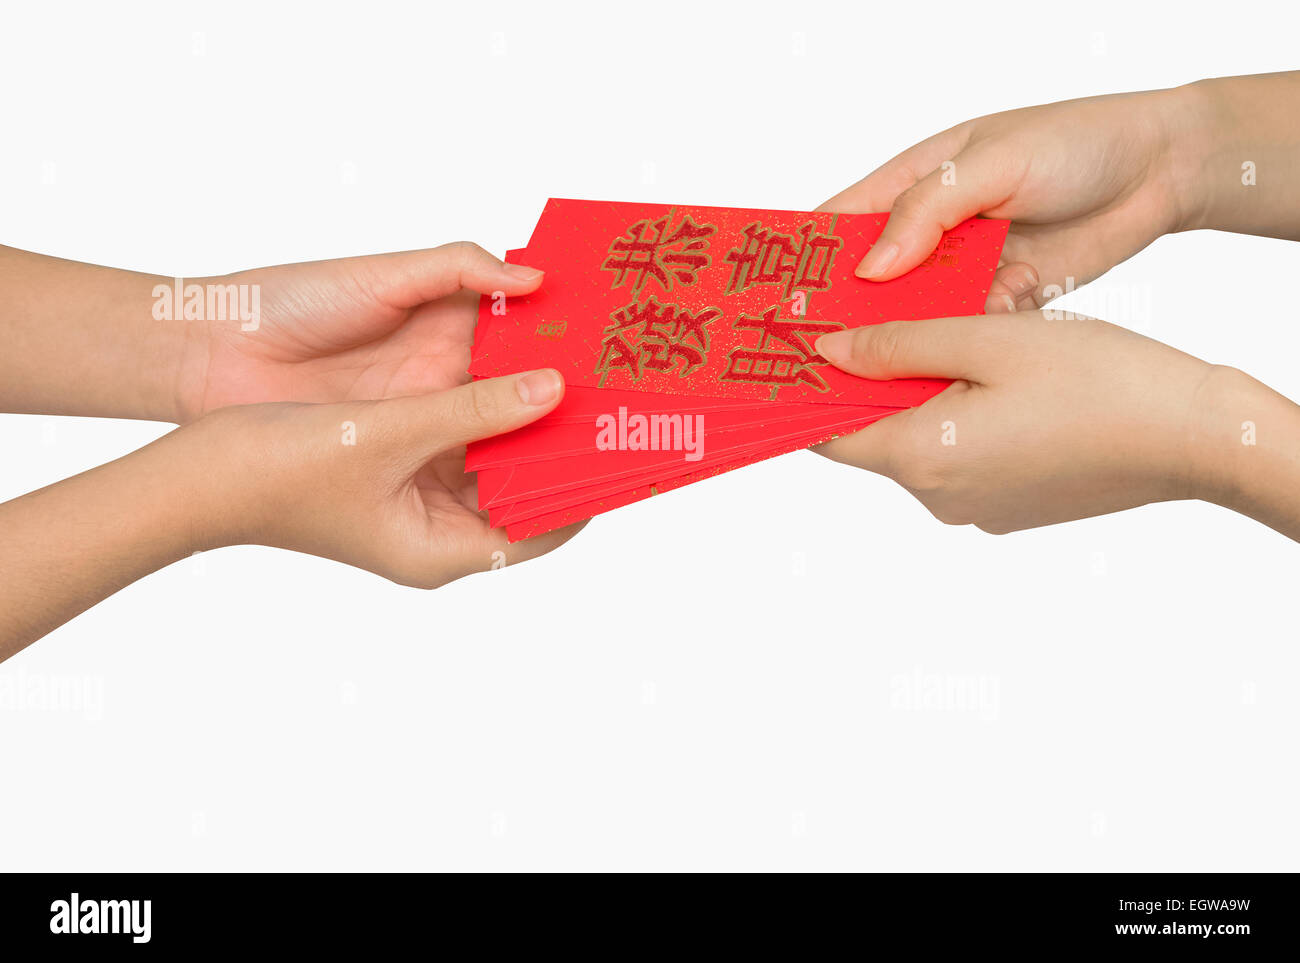 Chinese red envelopes or lai si with double happiness symbol Stock Photo -  Alamy